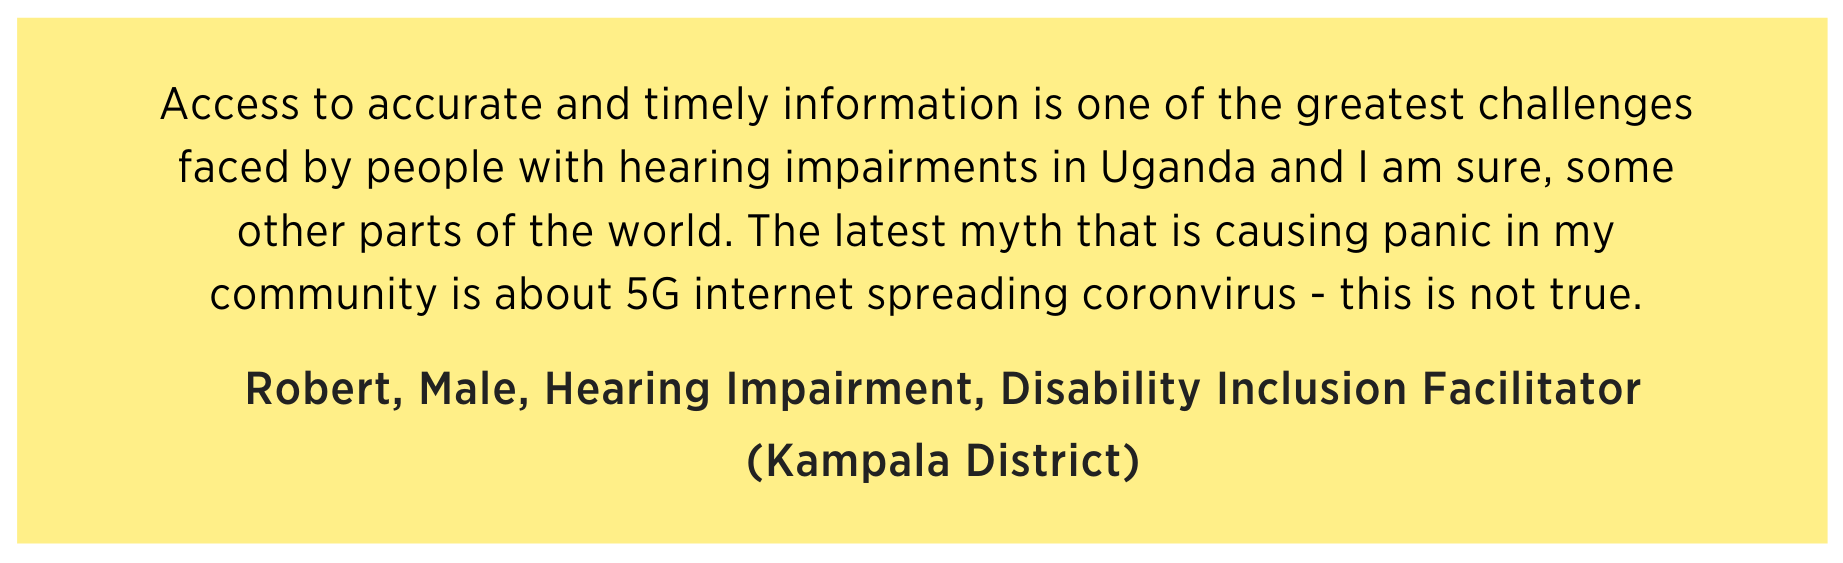 Robert says access to accurate and timely information is one of the greatest challenges faced by people with hearing impairments in Uganda and I am sure, some other parts of the world. The latest myth that is causing panic in my community is about 5G internet spreading coronavirus - this is not true.